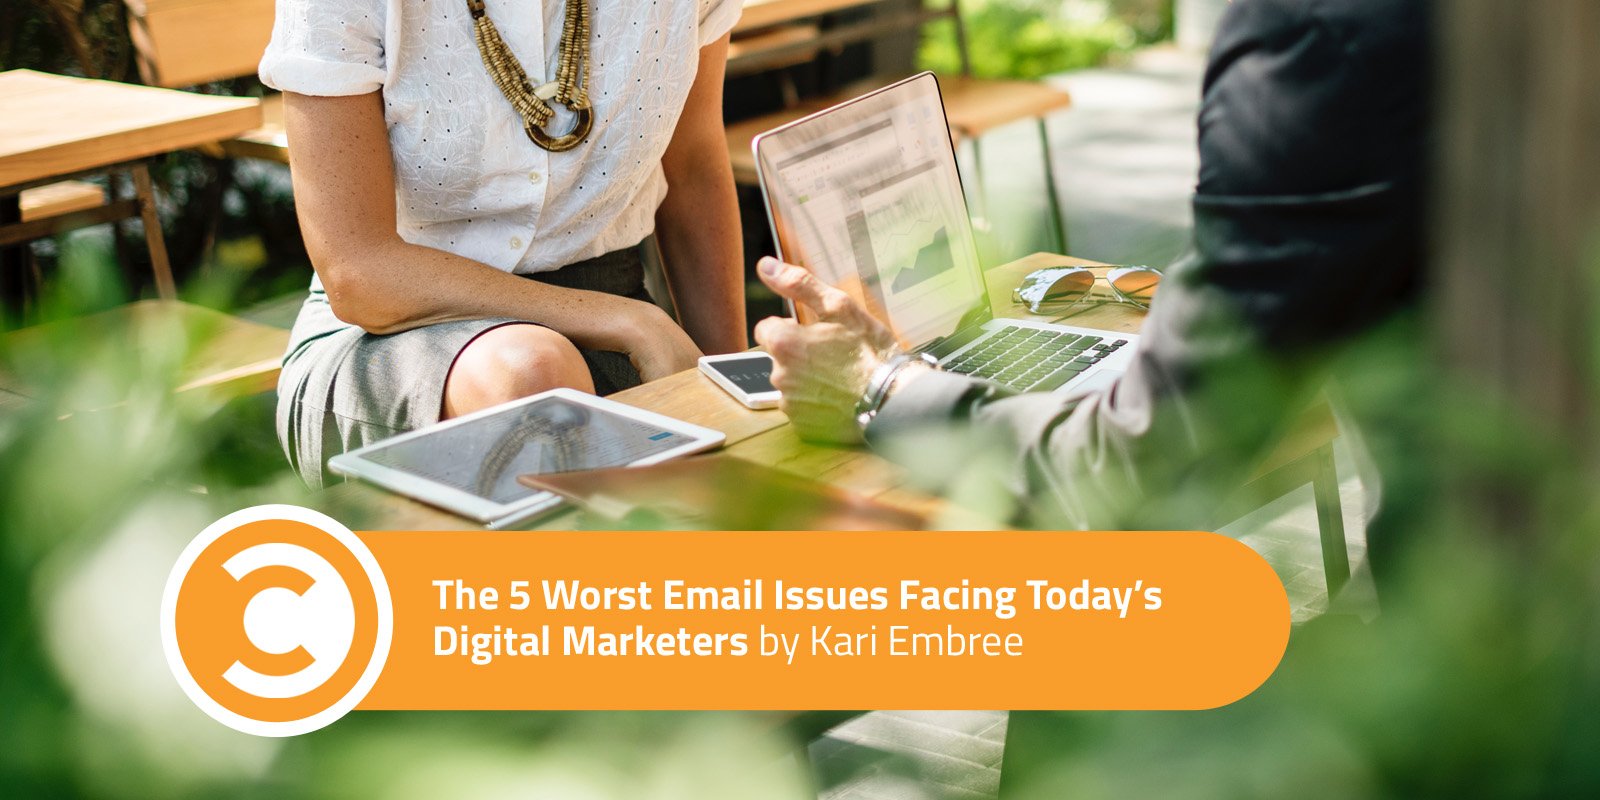 The 5 Worst Email Issues Facing Today’s Digital Marketers